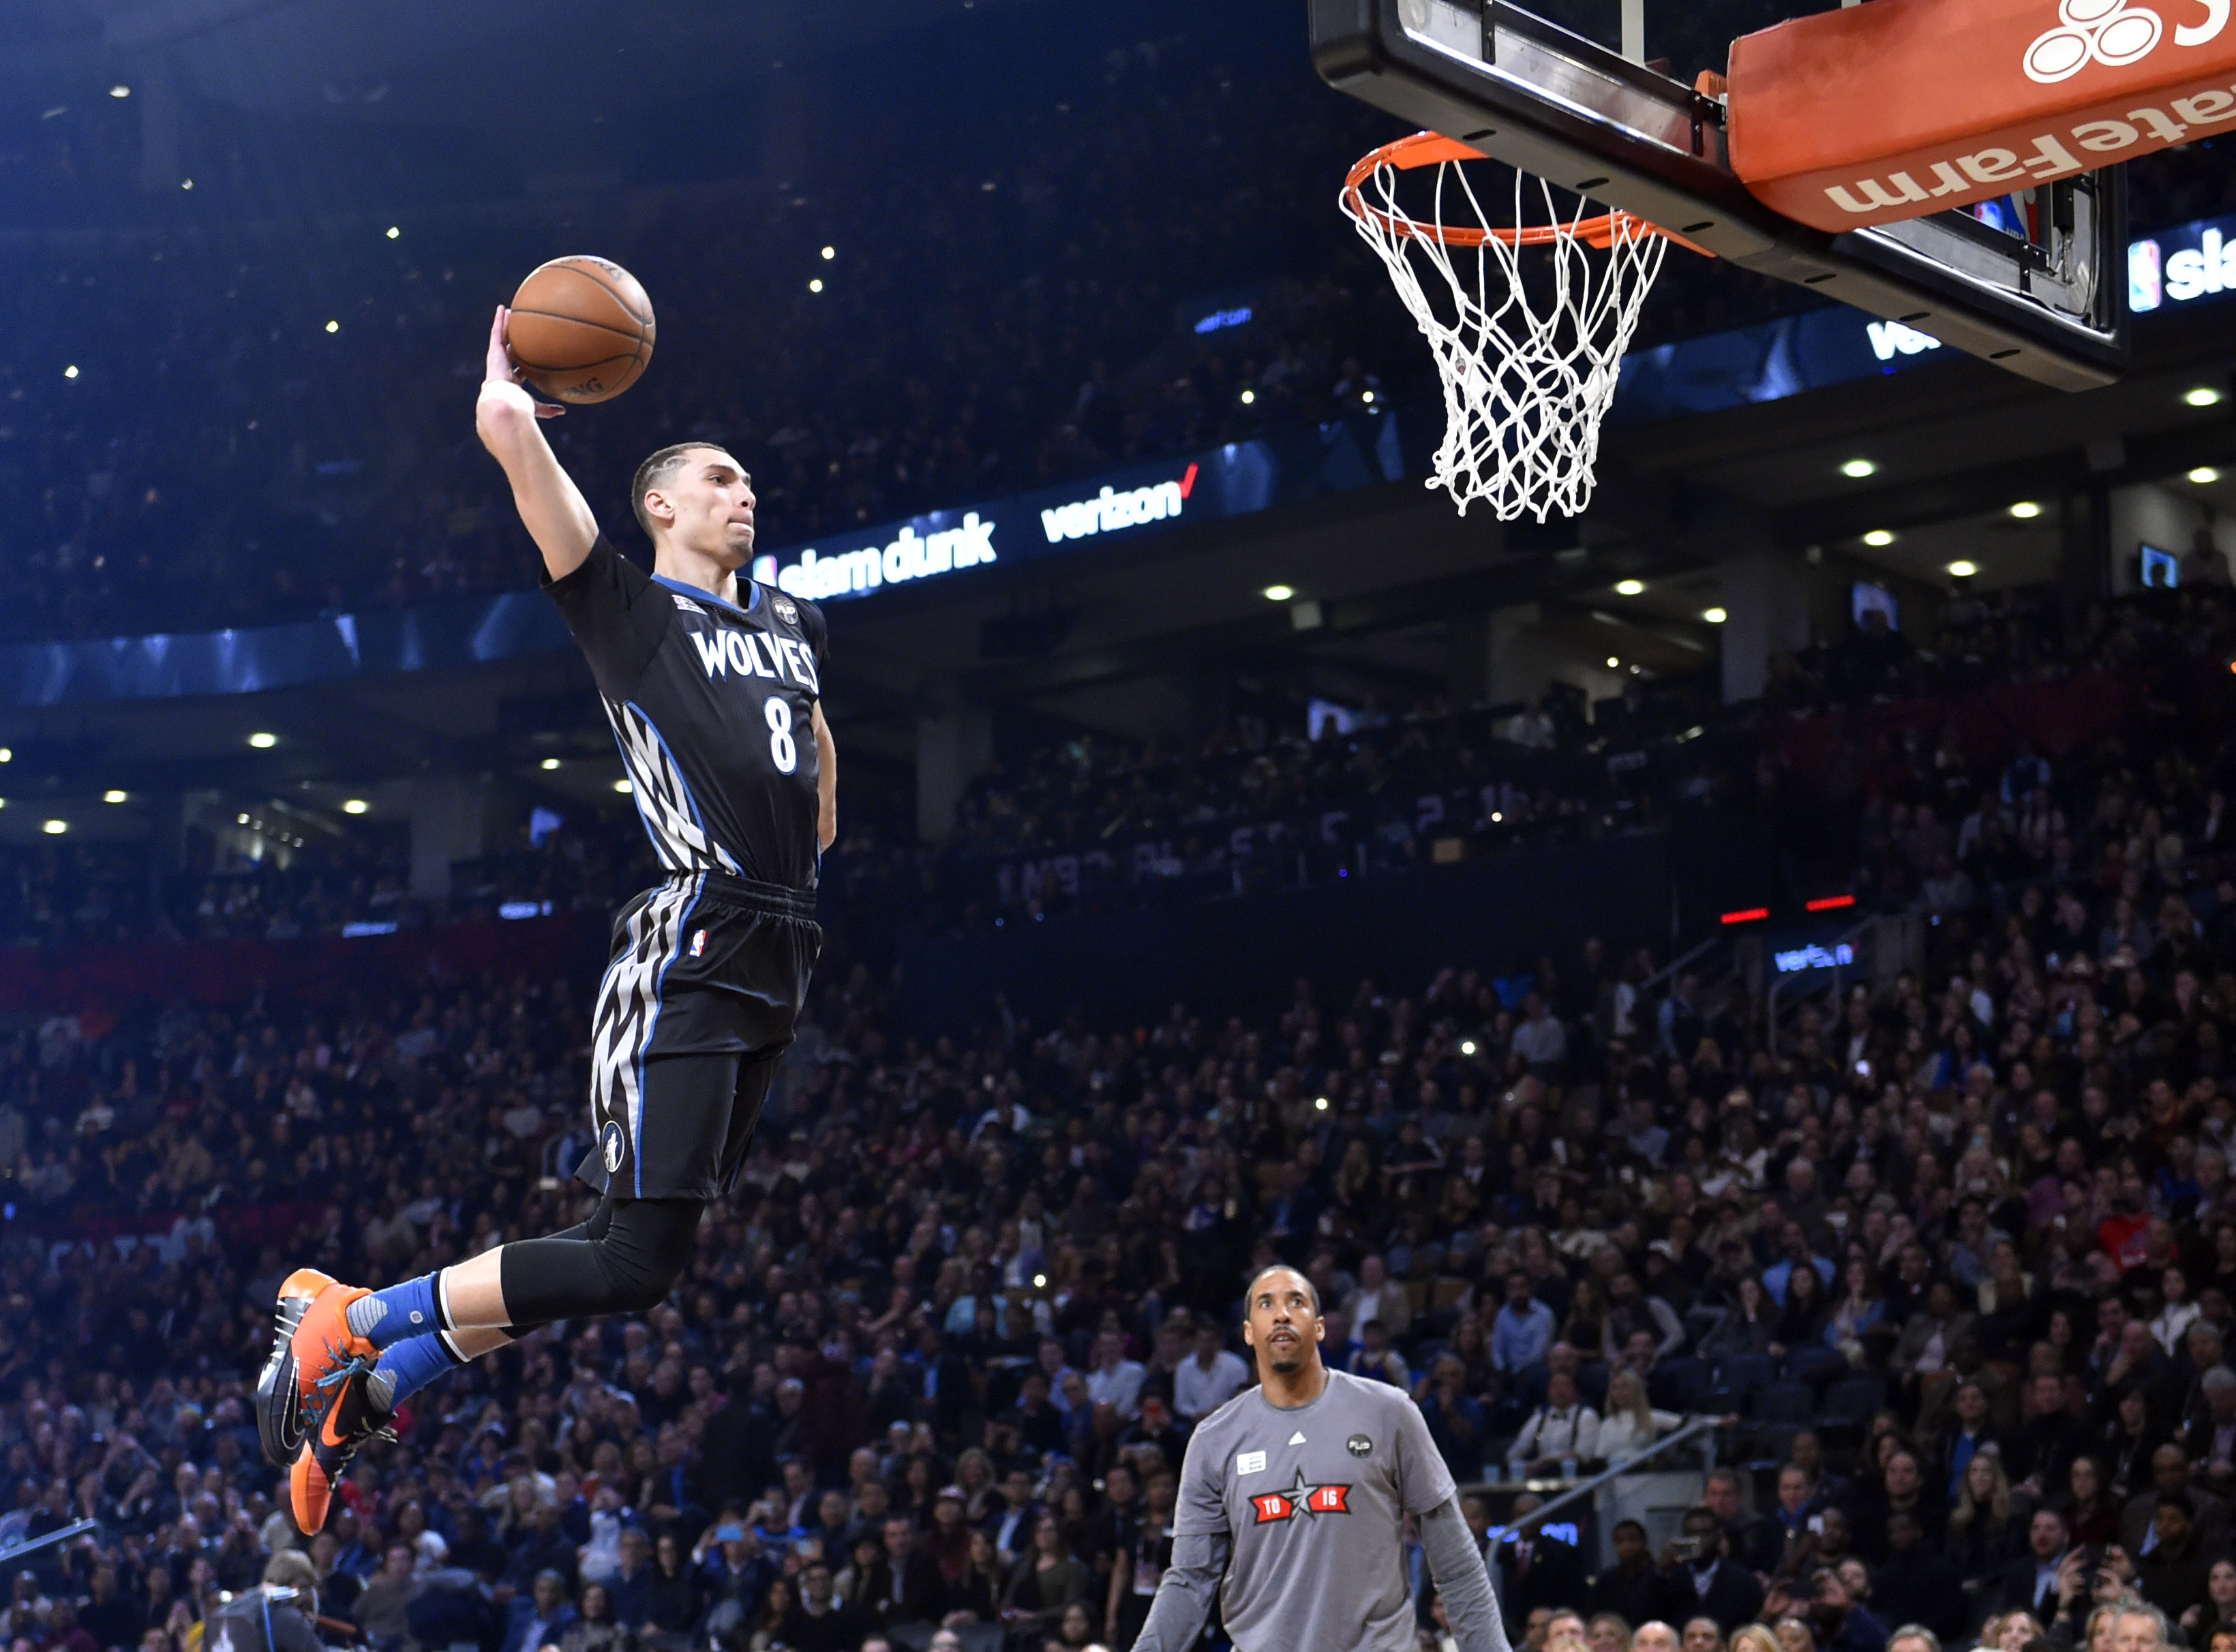 Can Andrew Wiggins and Zach LaVine Be NBA's Next High-Flying Duo